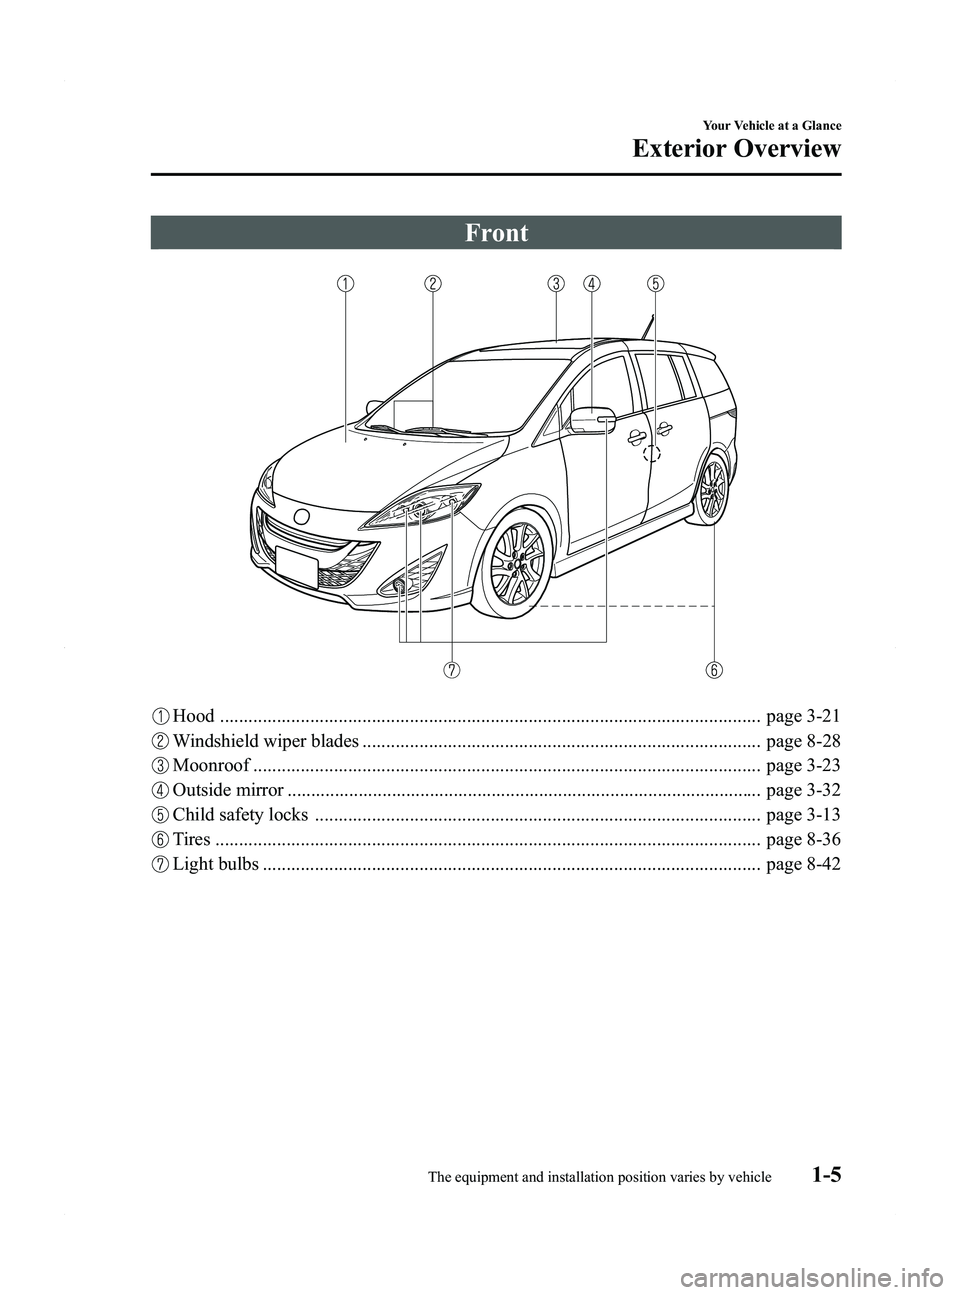 MAZDA MODEL 5 2015  Owners Manual Black plate (11,1)
Front
Hood .................................................................................................................. page 3-21
Windshield wiper blades .....................